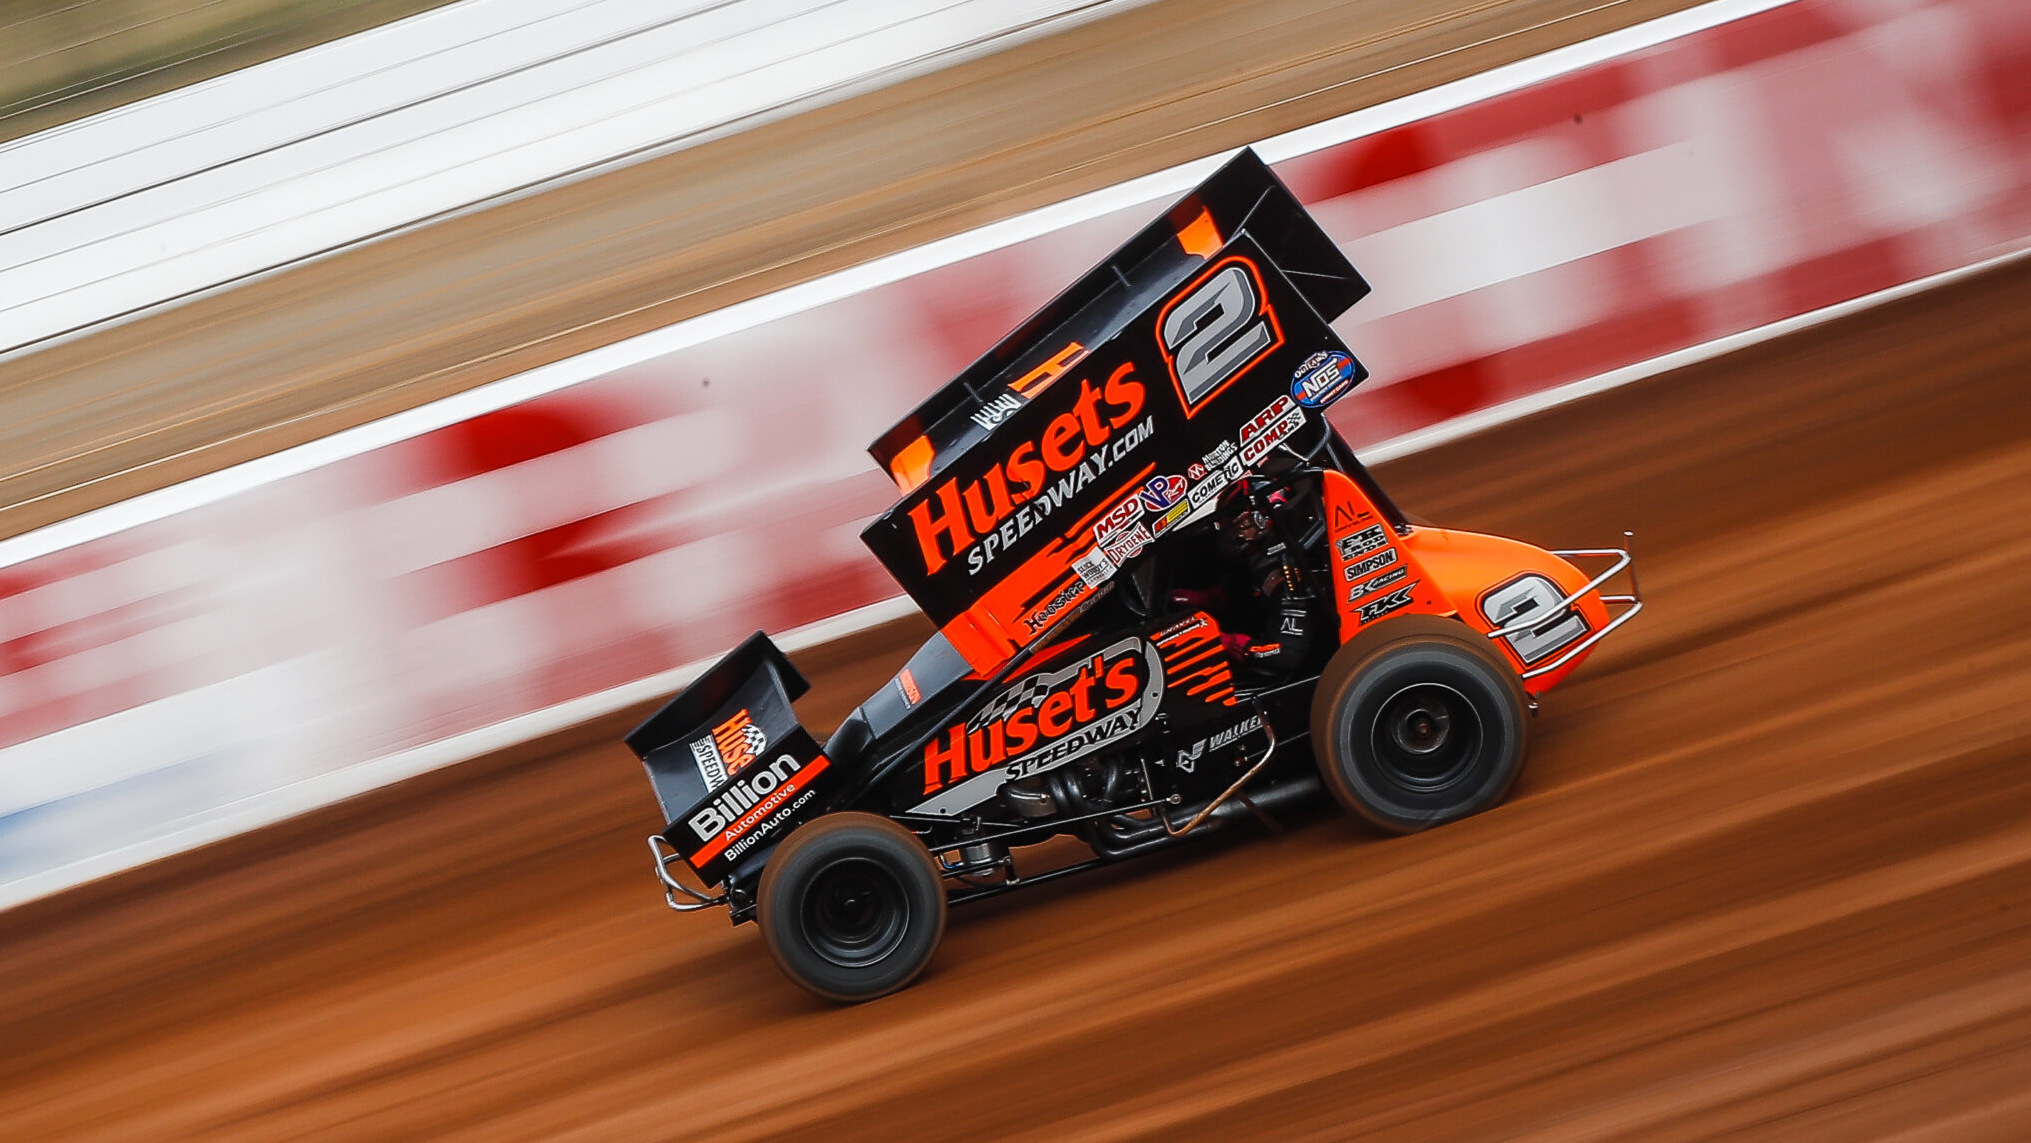 World of Outlaws Dirt Racing annoncé